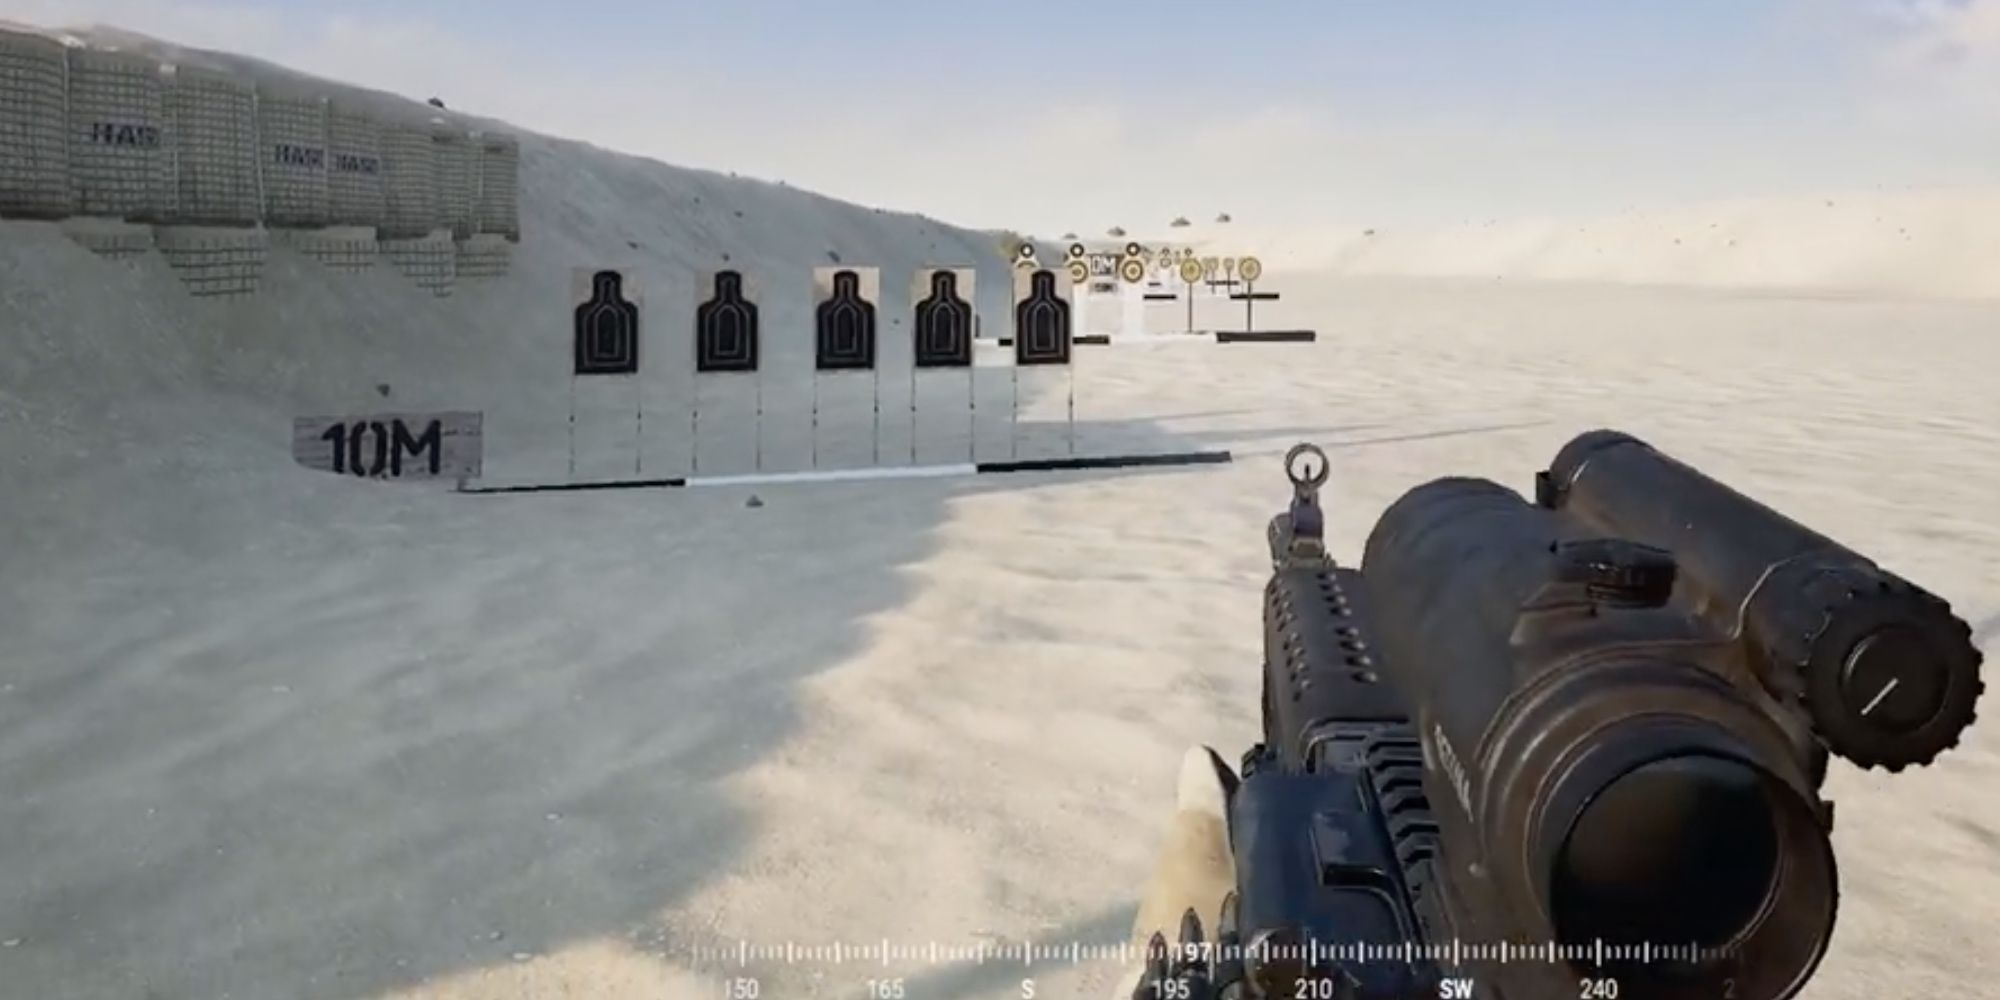 Player shoots an enemy from a distance to avoid getting hit